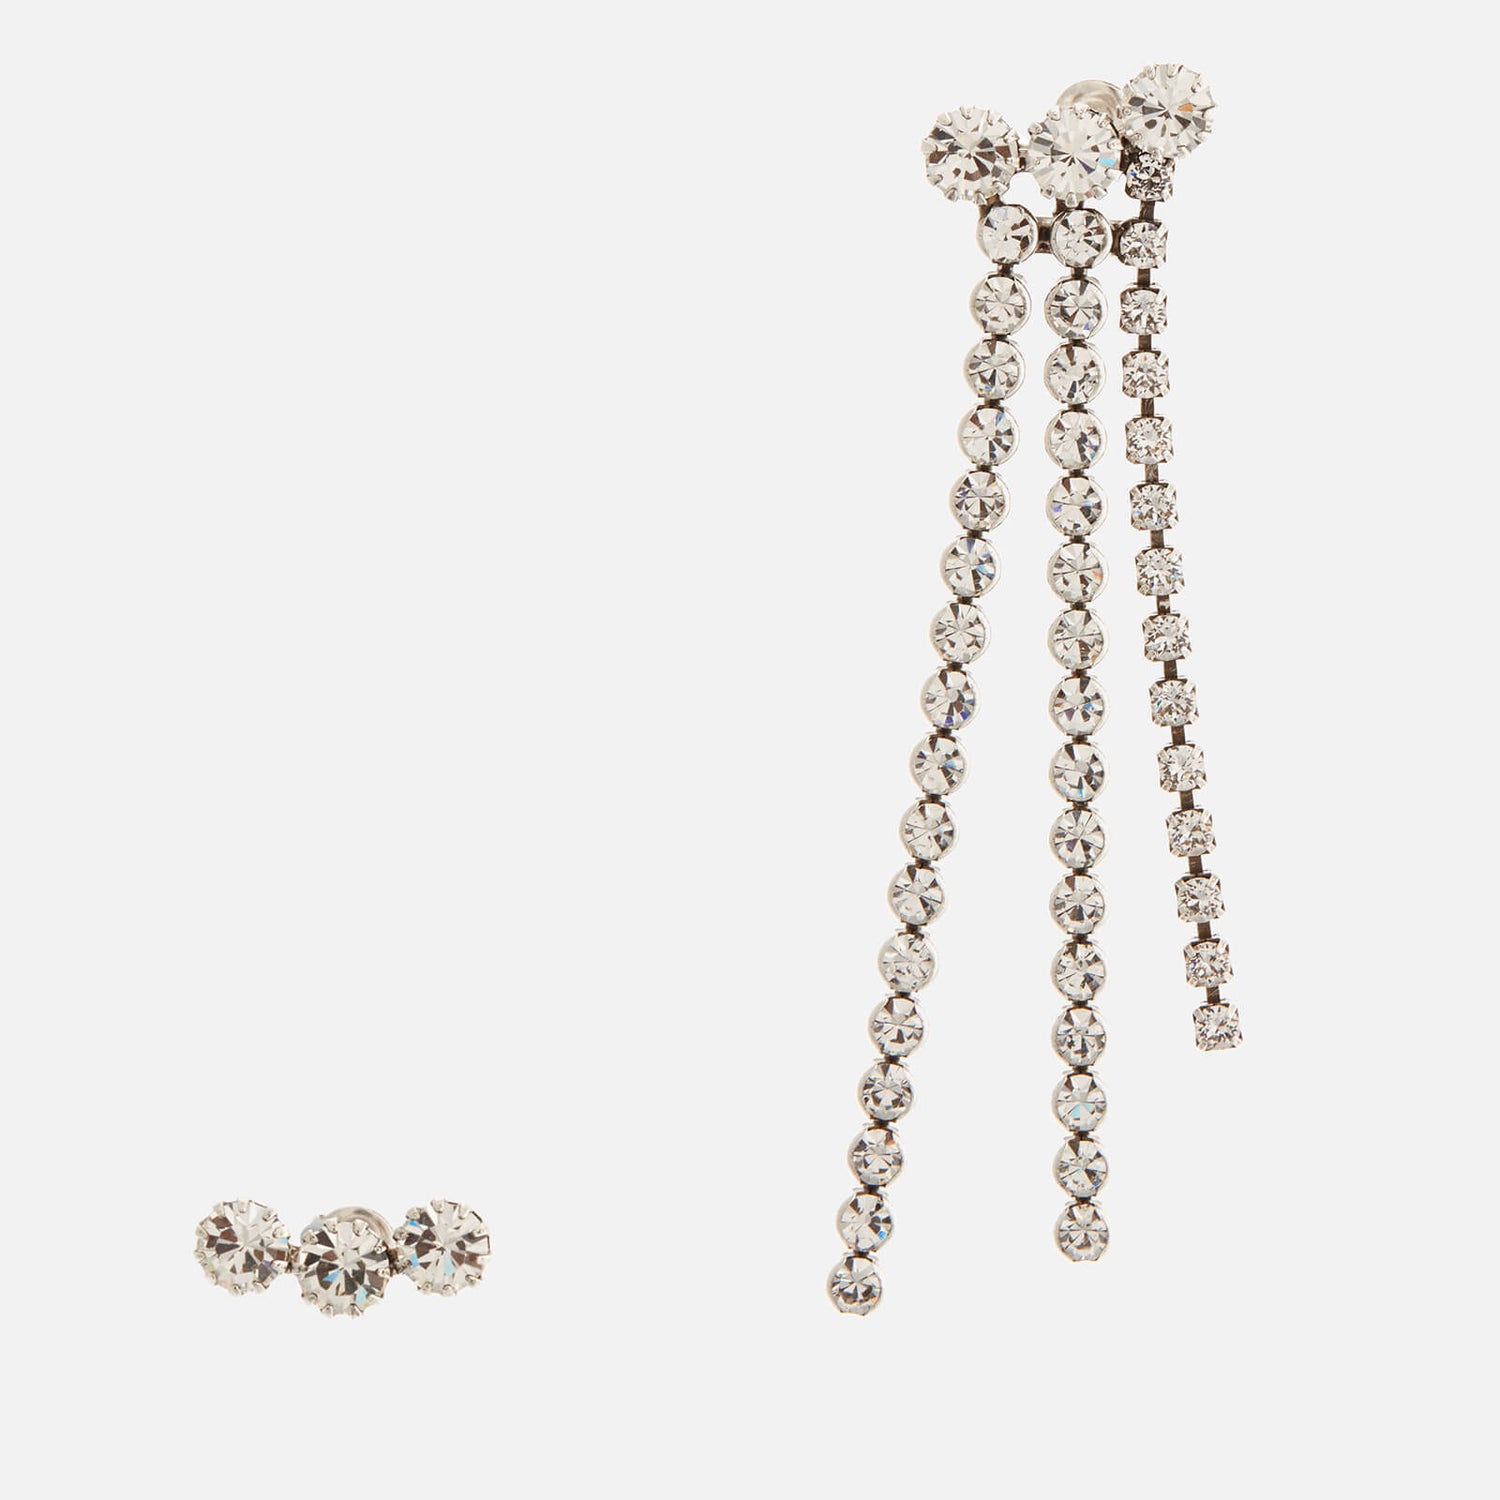 Isabel Marant Women's Mismatched Crystal Earrings - Silver